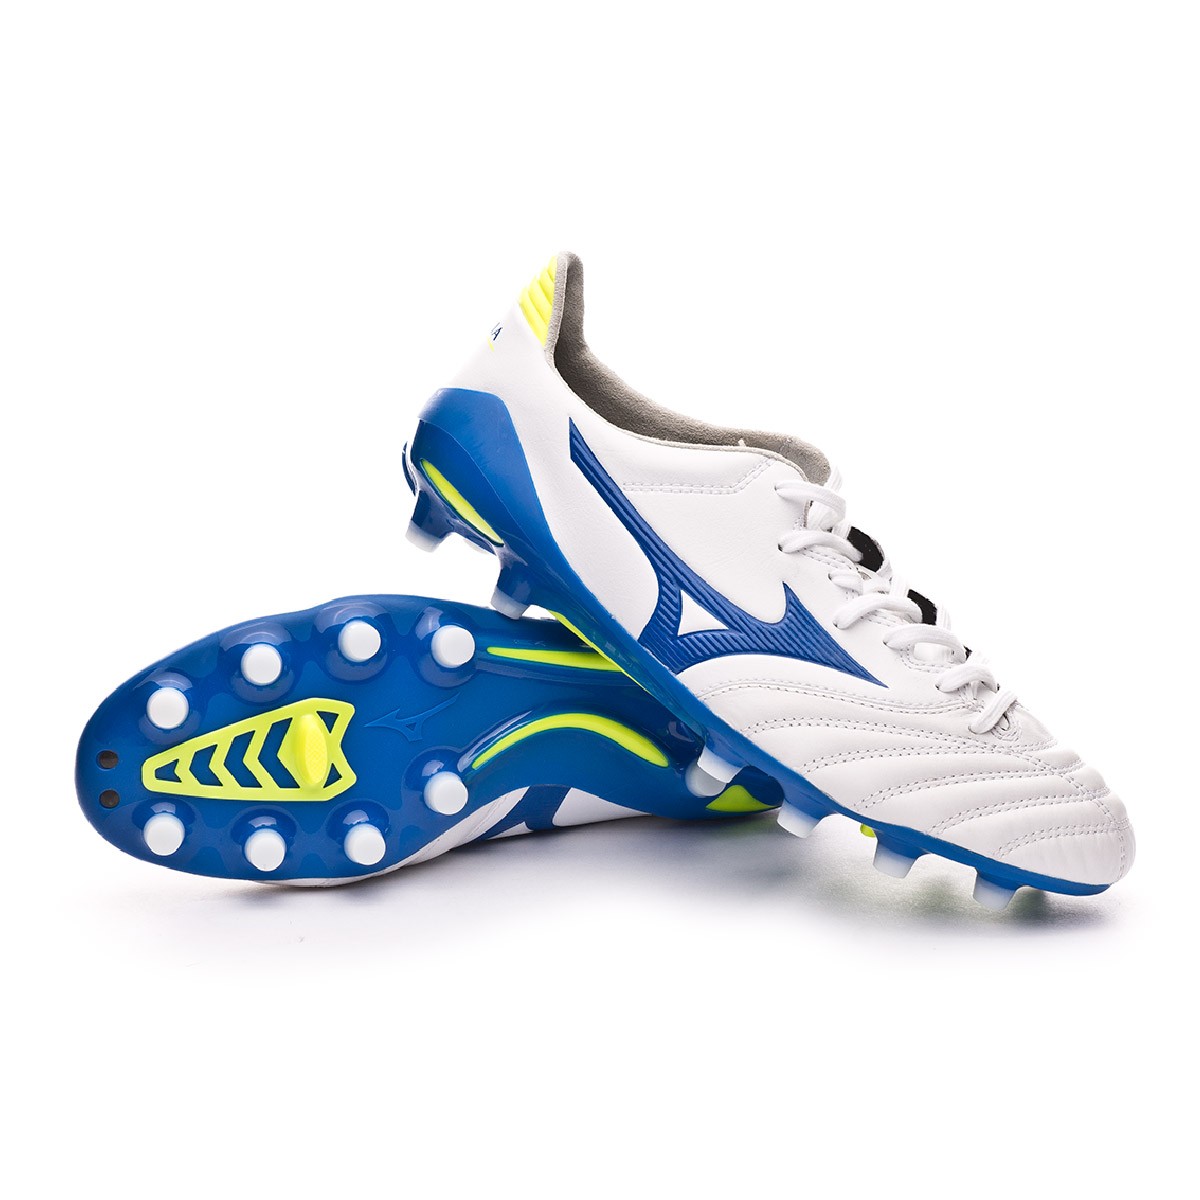 Football Boots Mizuno Morelia Neo II MD White-Wave cup blue-Safety yellow -  Football store Fútbol Emotion